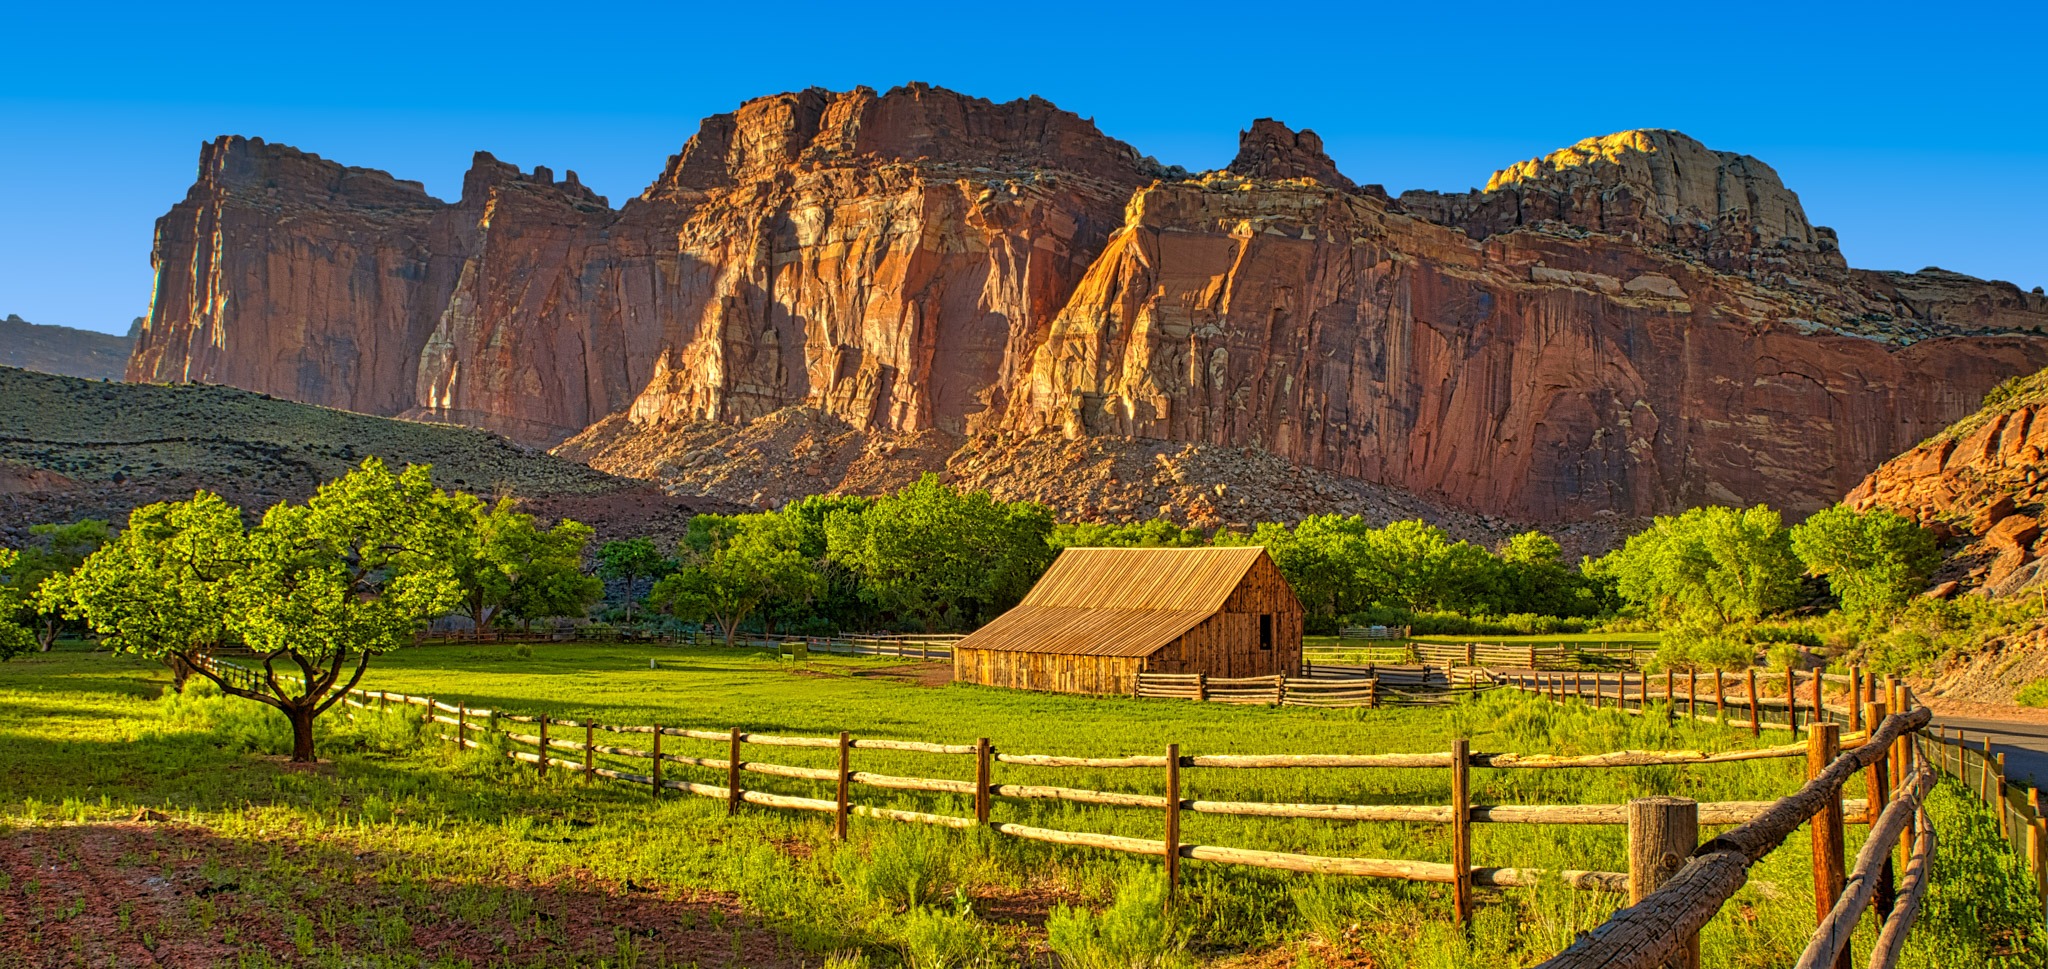 A view of one of the barns on the Gifford Homestead with red cliffs of the Waterpocket Fold in the background, in the Fruita District of Capitol Reef National Park in Utah.